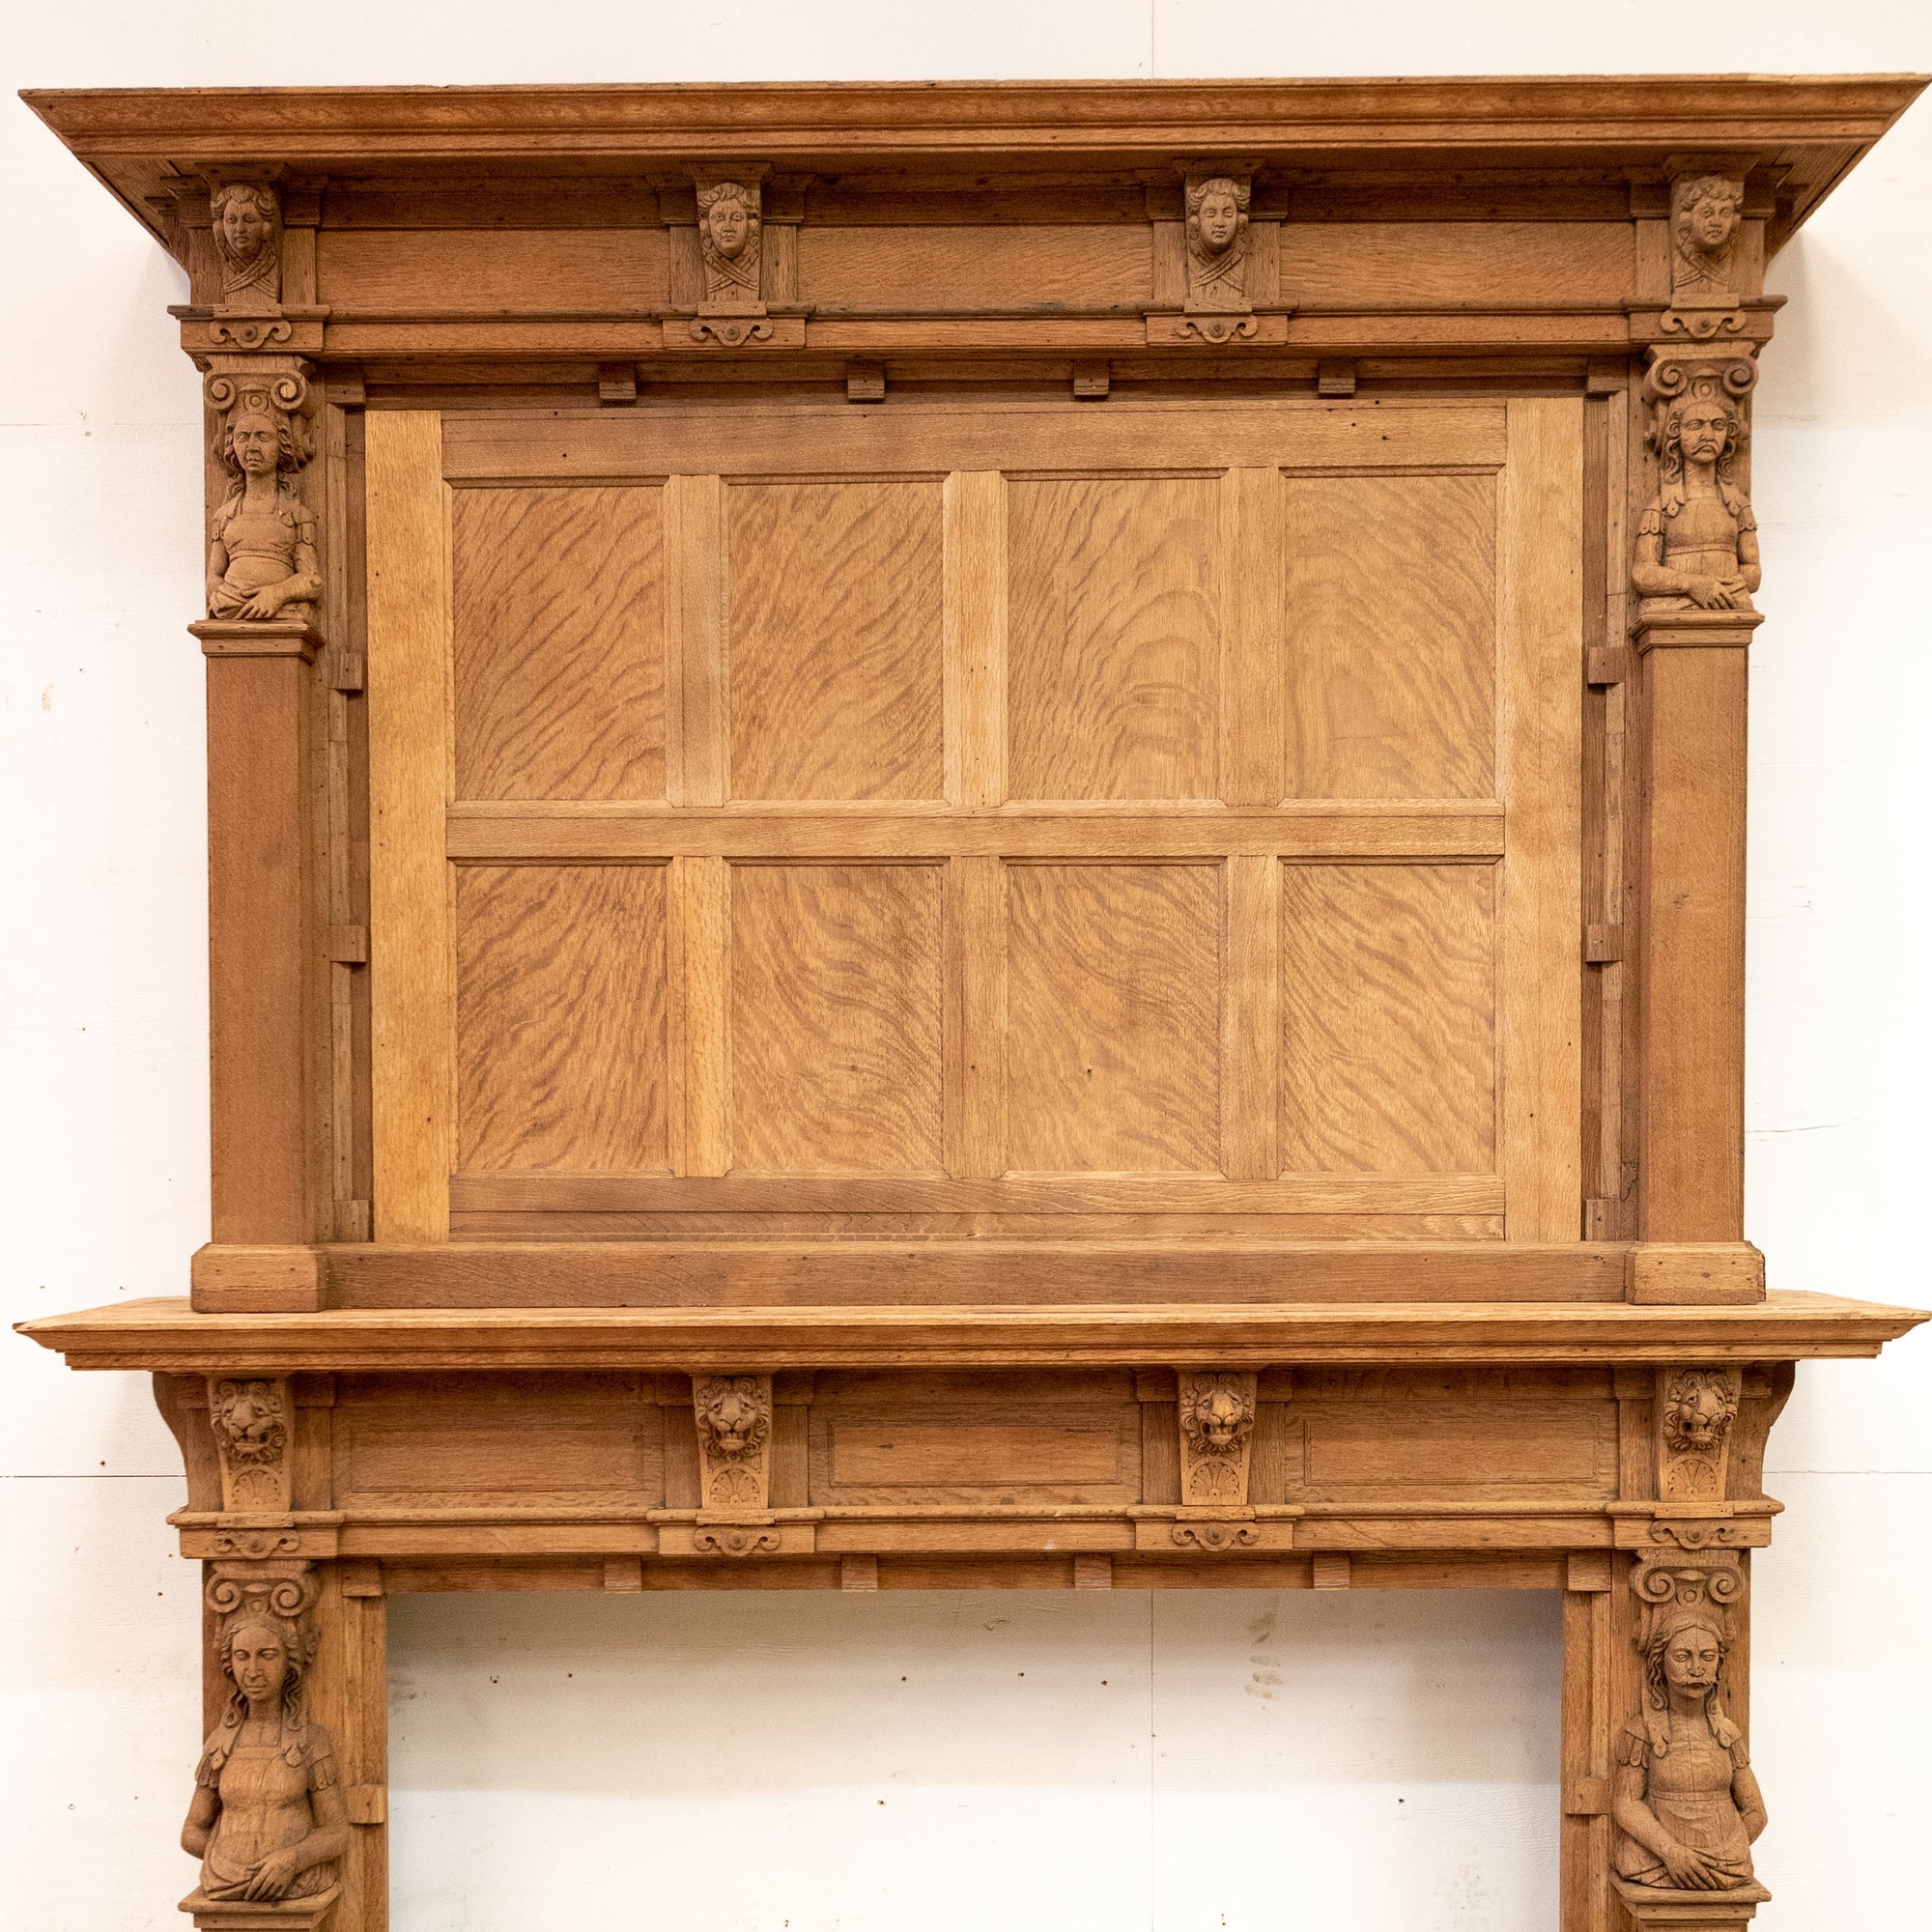 Spectacular Carved Oak Jacobean Style Fireplace with Overmantle | The Architectural Forum